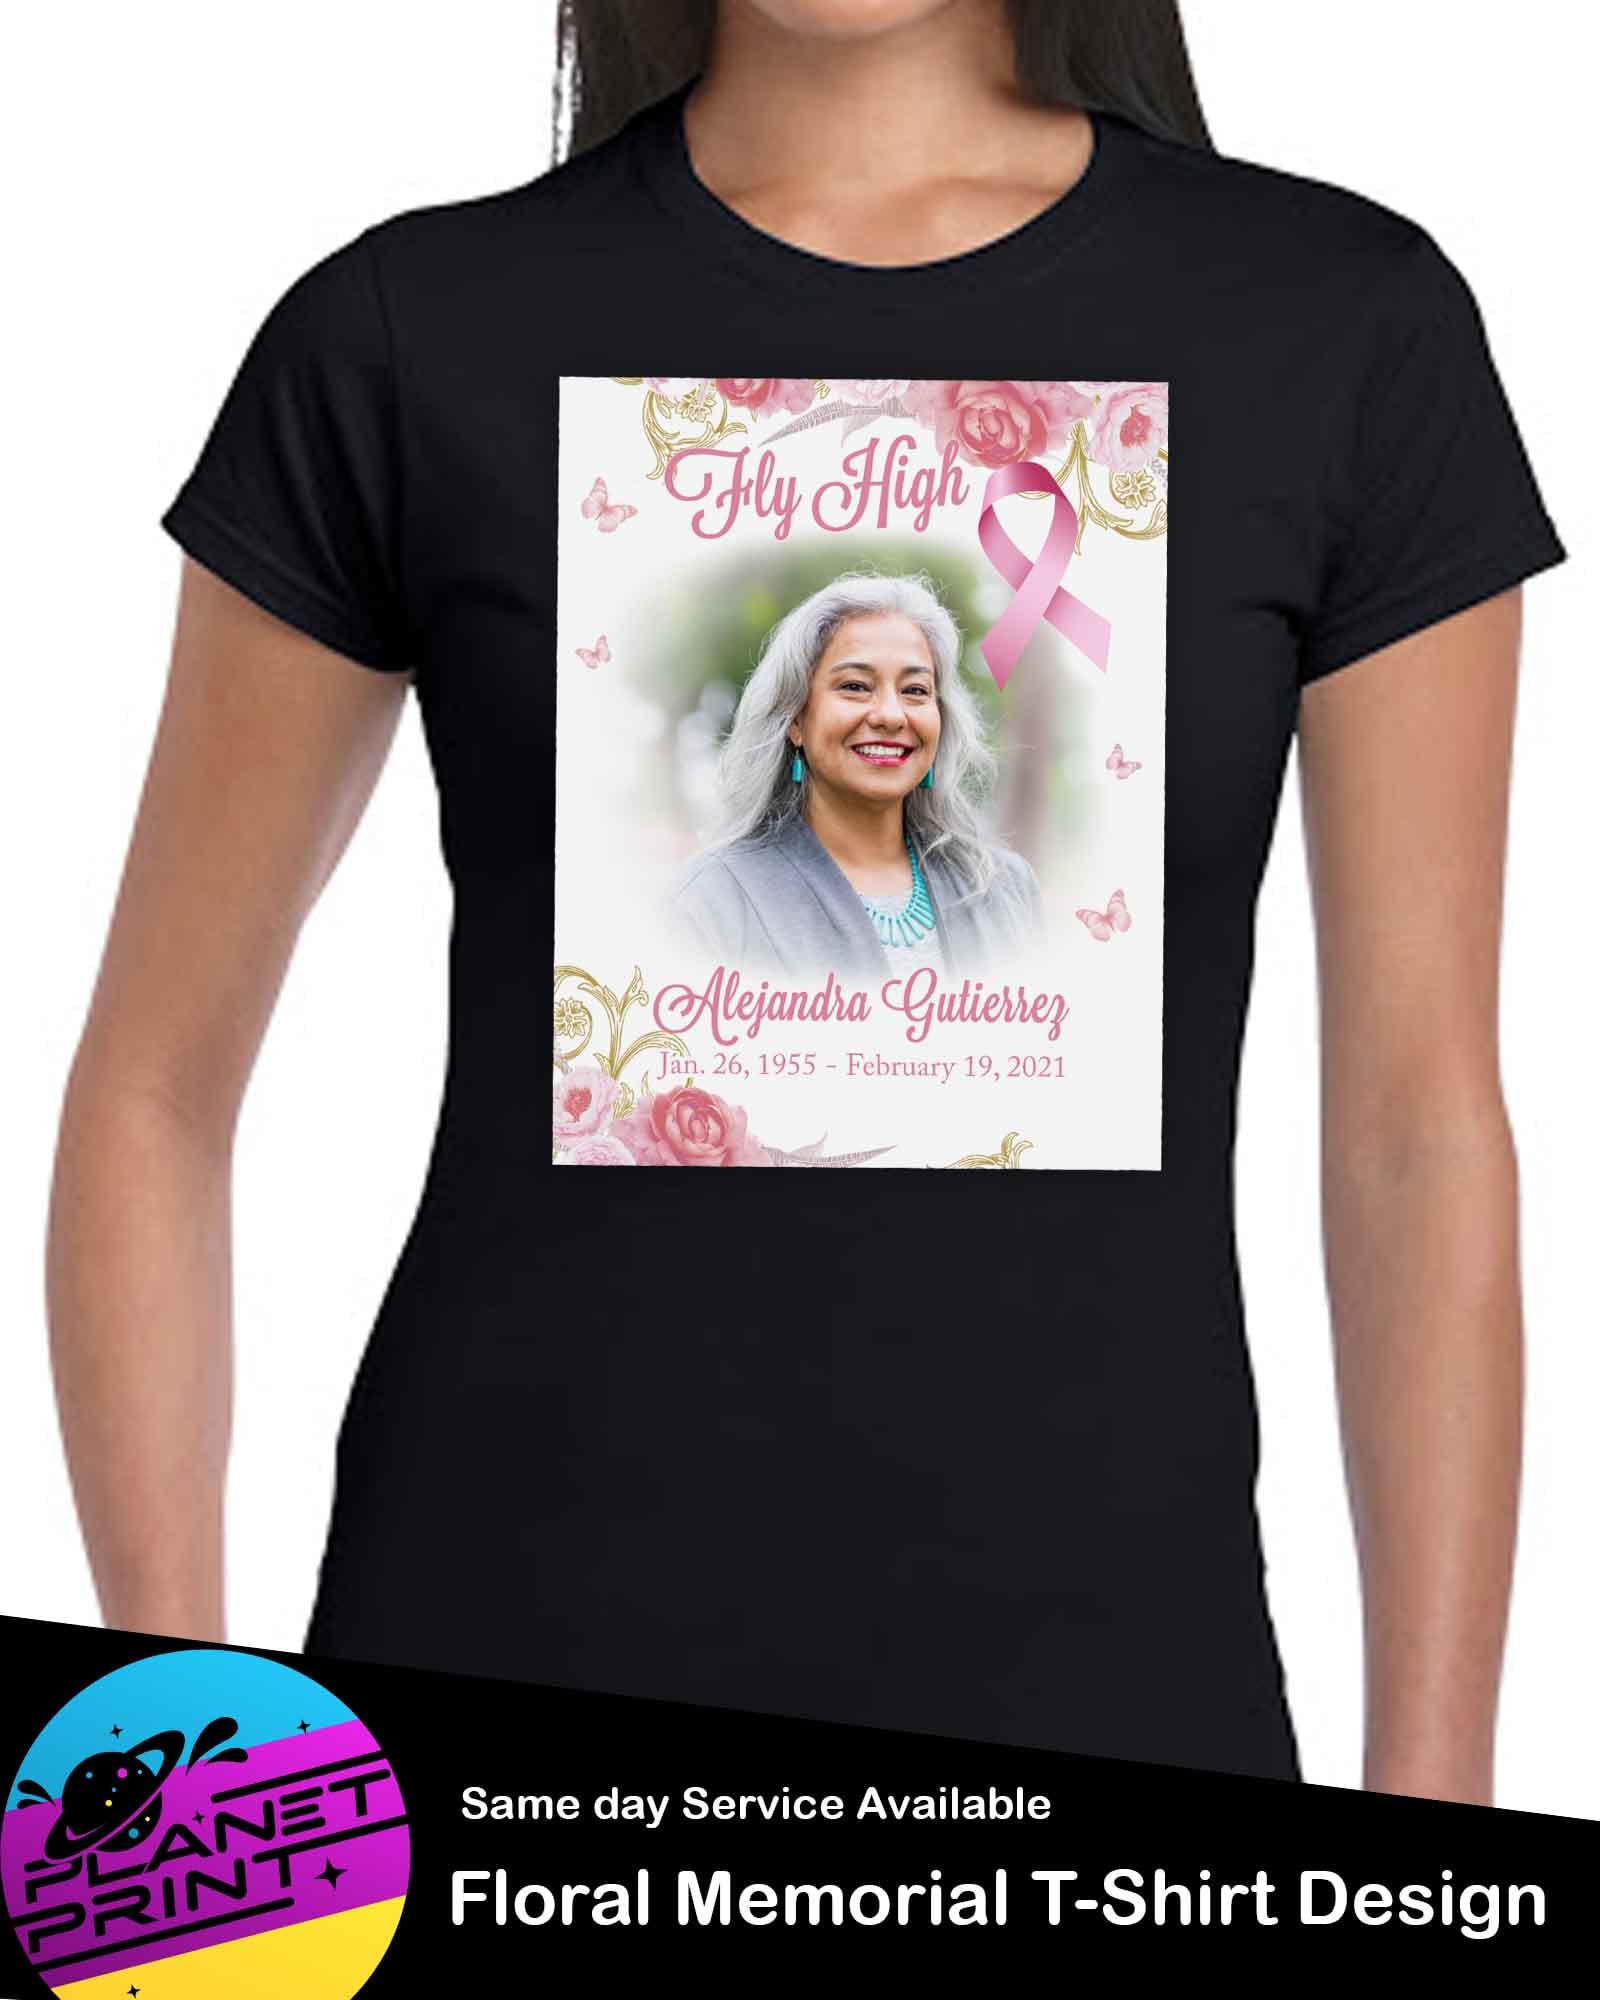 In Loving Memory Shirts The Discovertee Shirt Printing And Embroidery